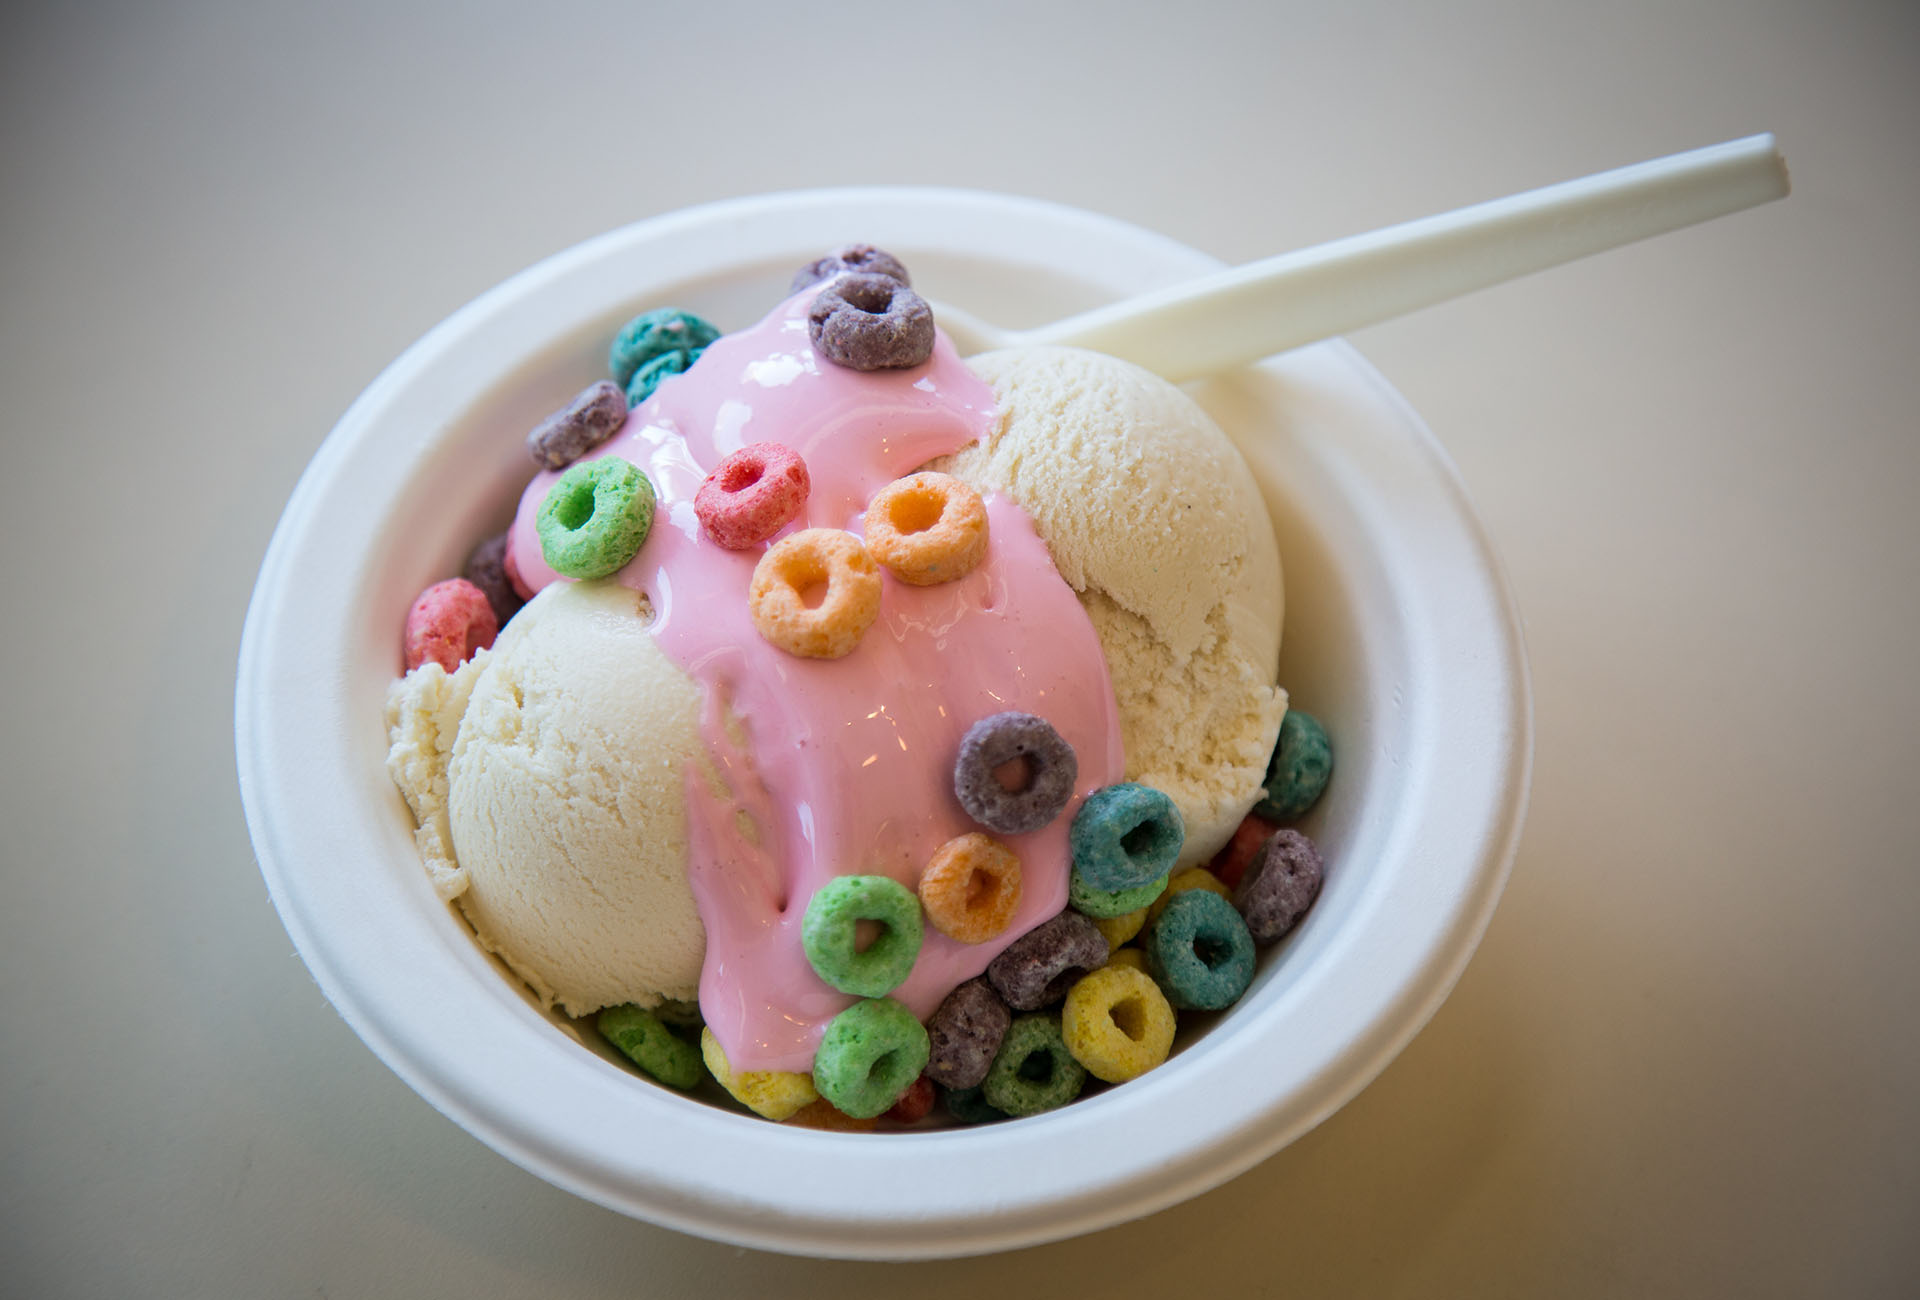 The Make It Gay Sundae, made with your choice of ice cream, house-made pink marshmallow fluff, and Fruit Loops.